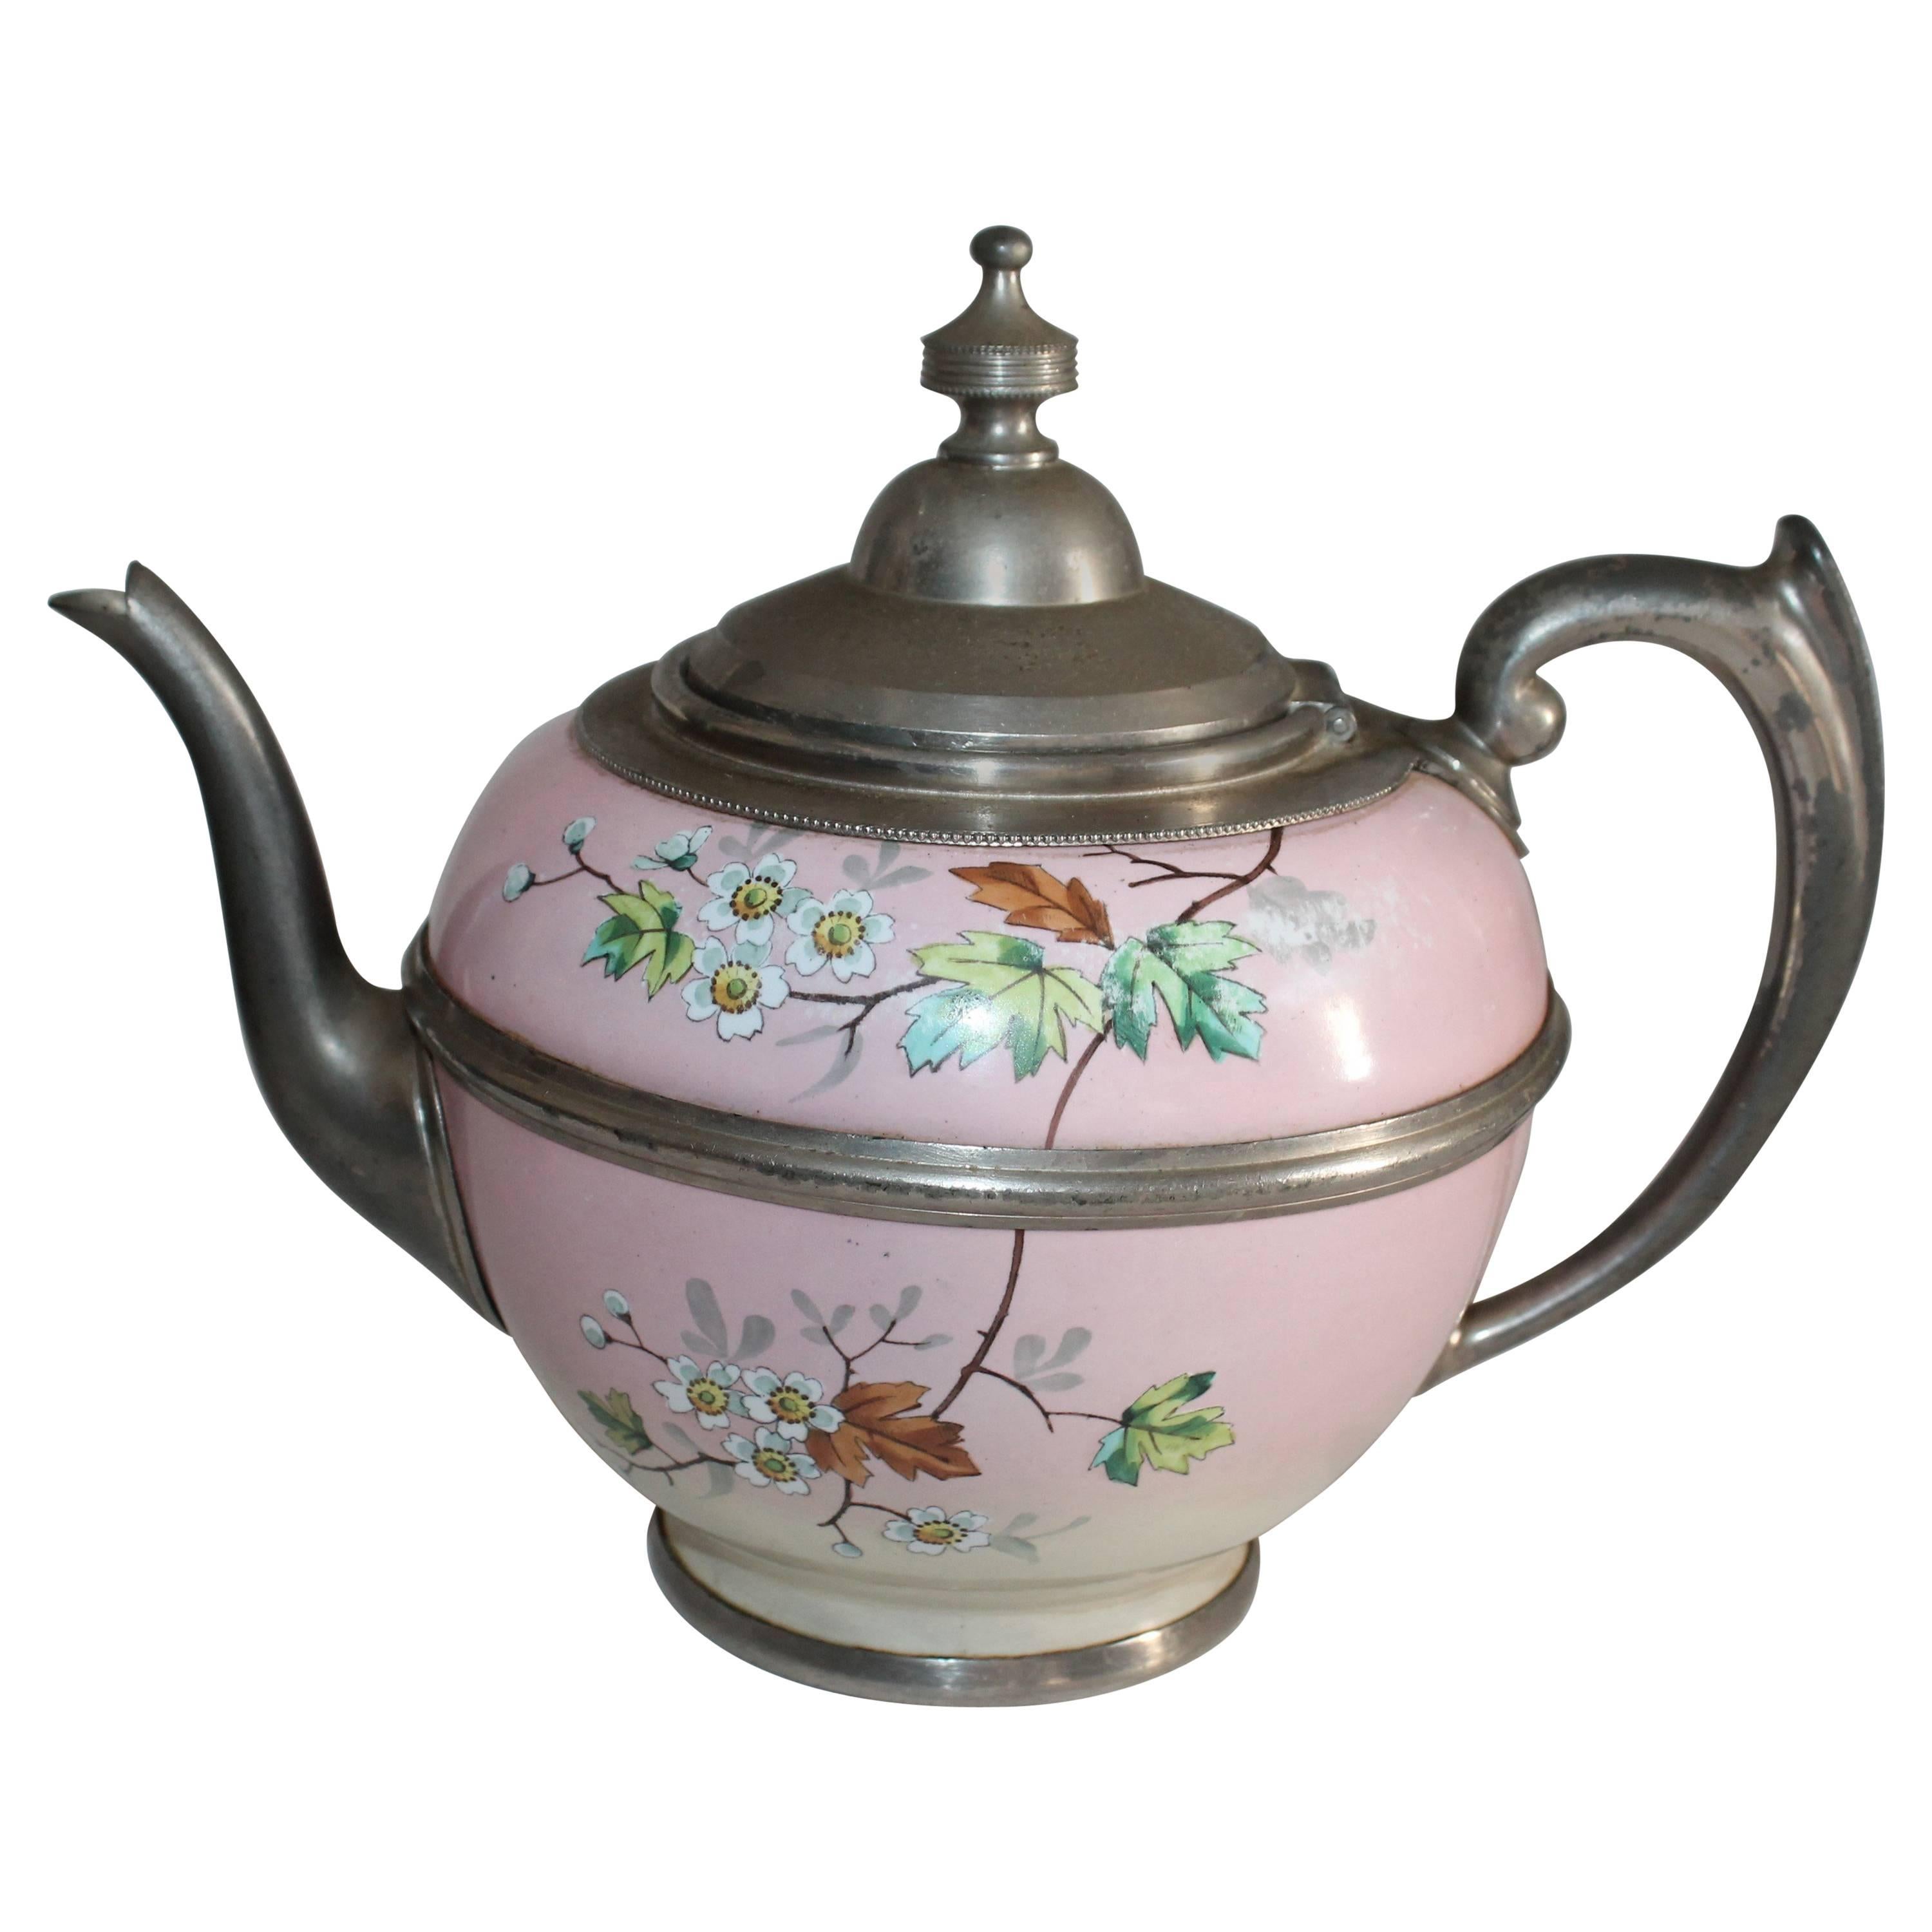 Rare 19th Century Painted Enamel and Pewter Tea Pot